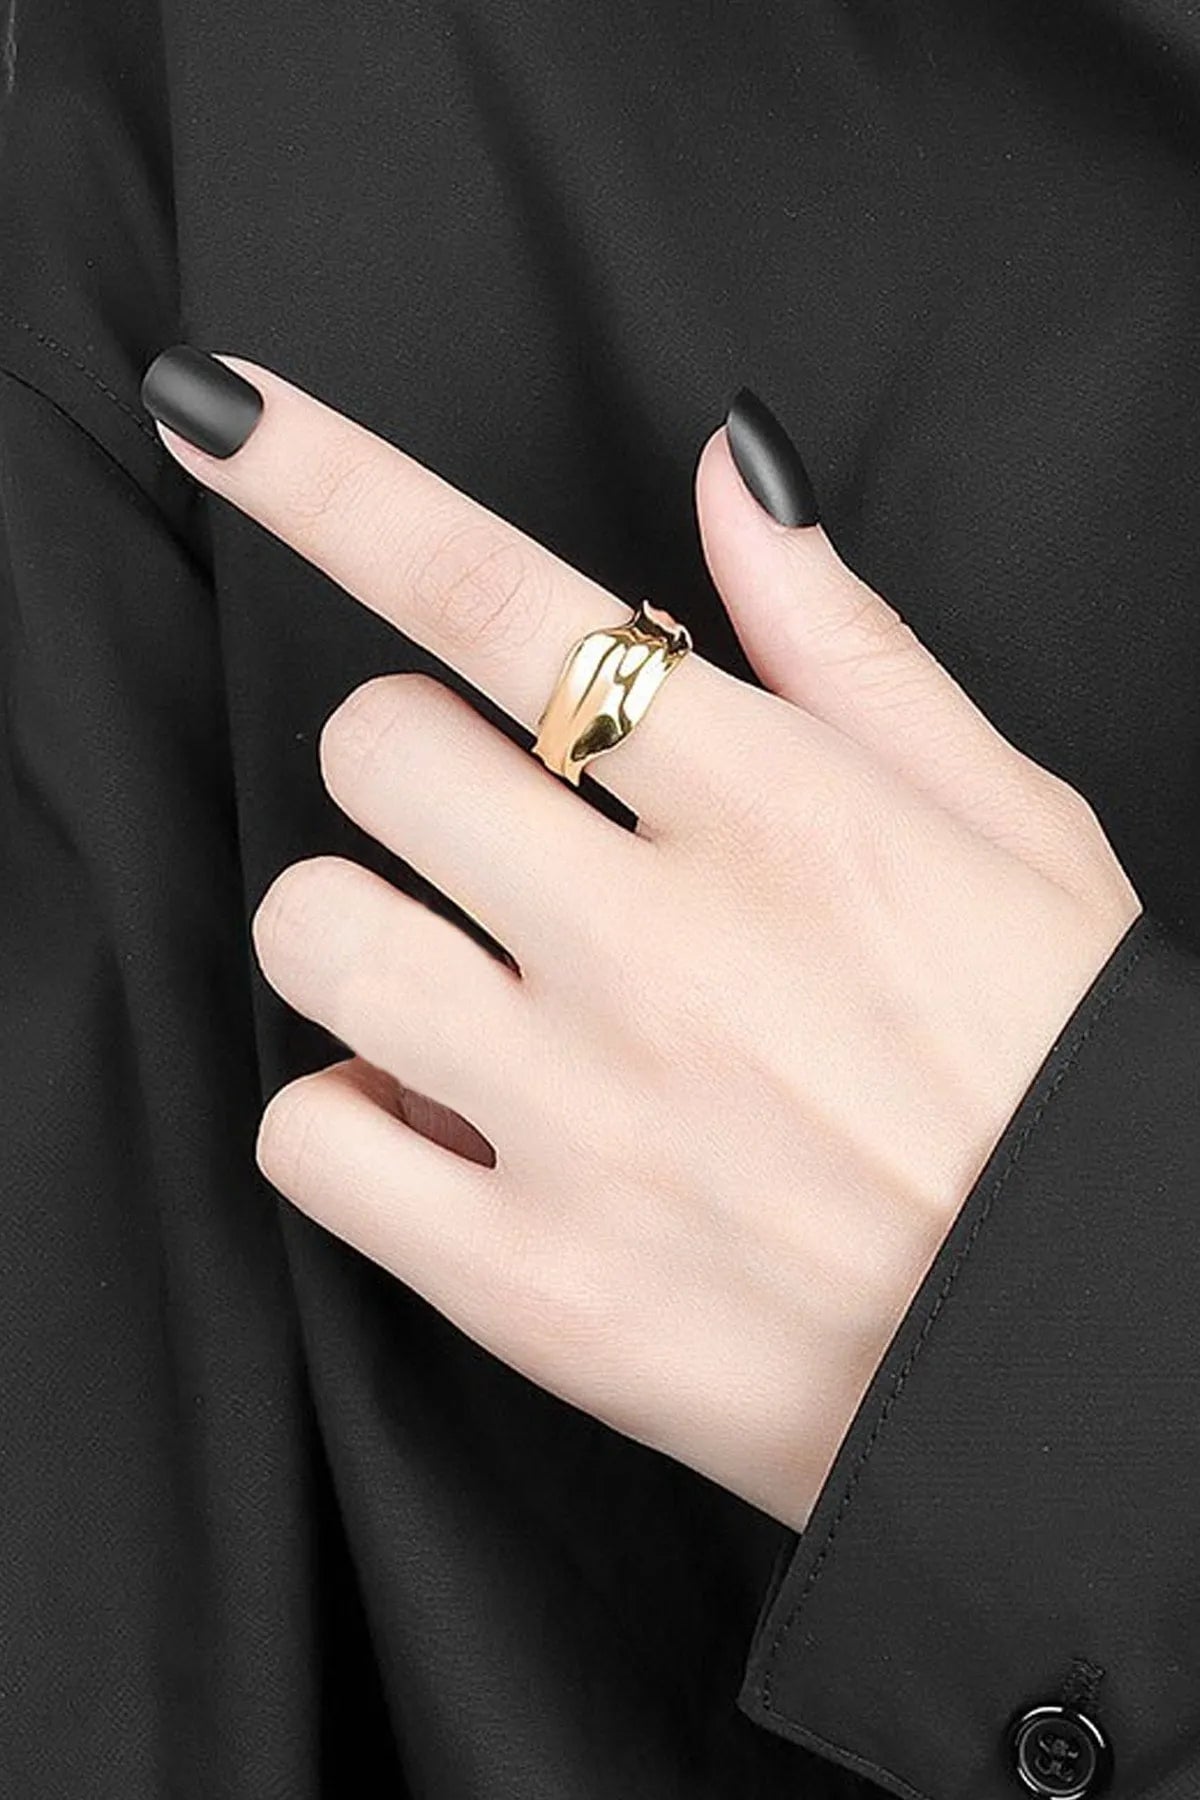 Women's Gold Color Design Ring with Adjustable Size